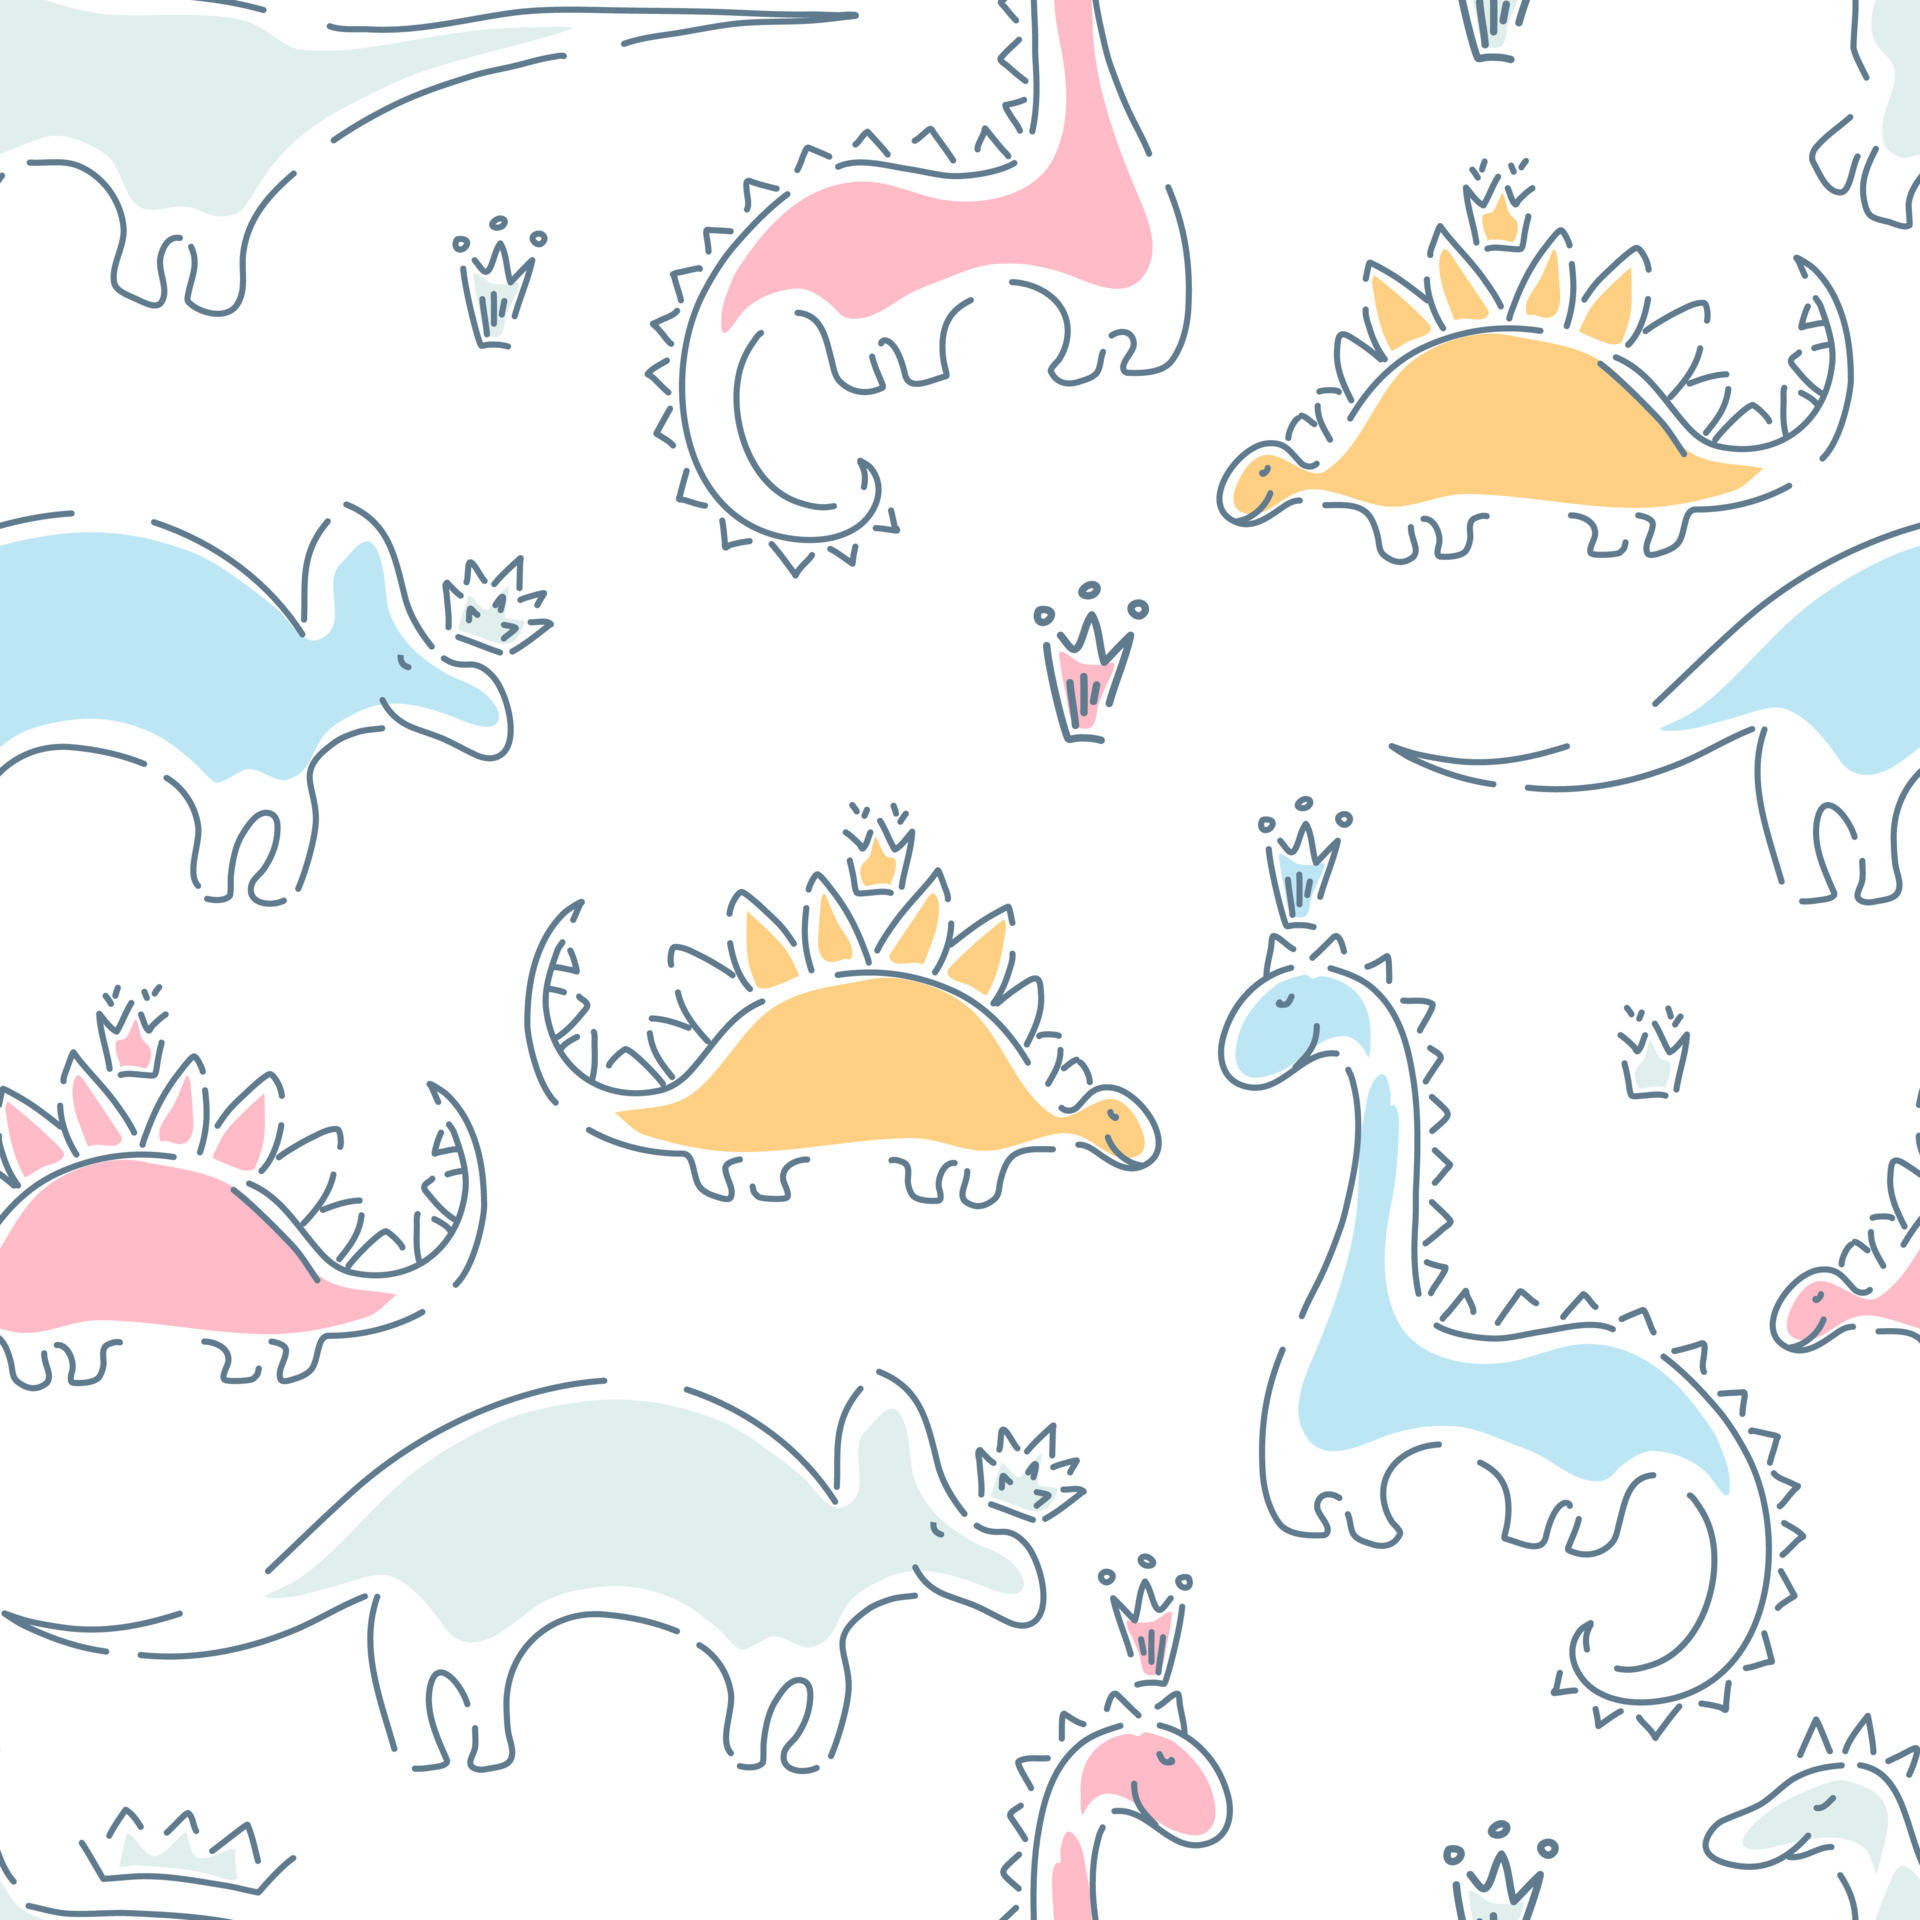 "Fans of Dinosaurs Will Love this Fun and Colorful Cute Dinosaur Pattern" Wallpaper